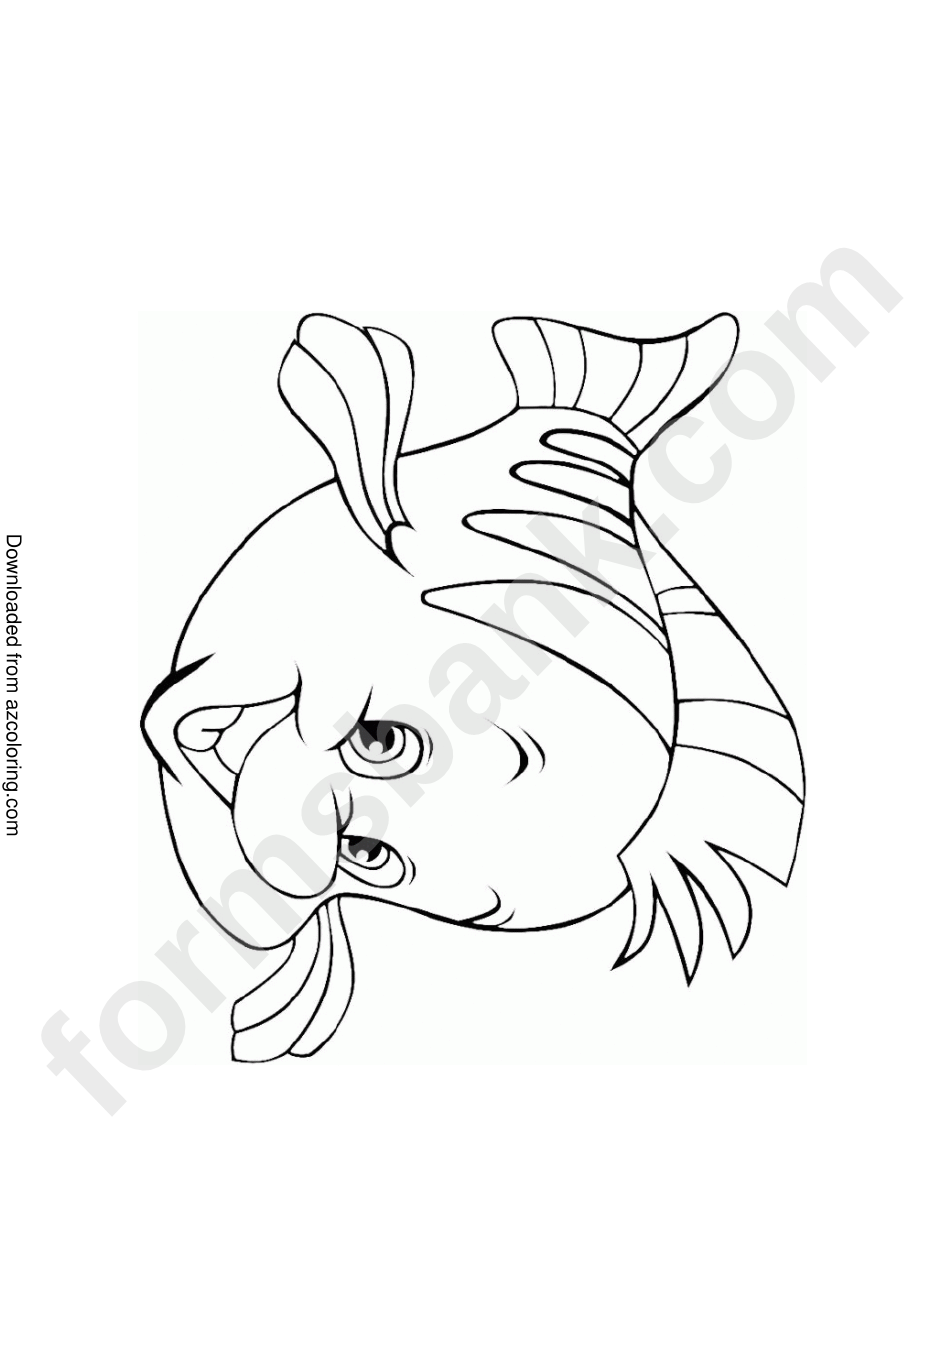 James (The Little Mermaid) Coloring Sheets